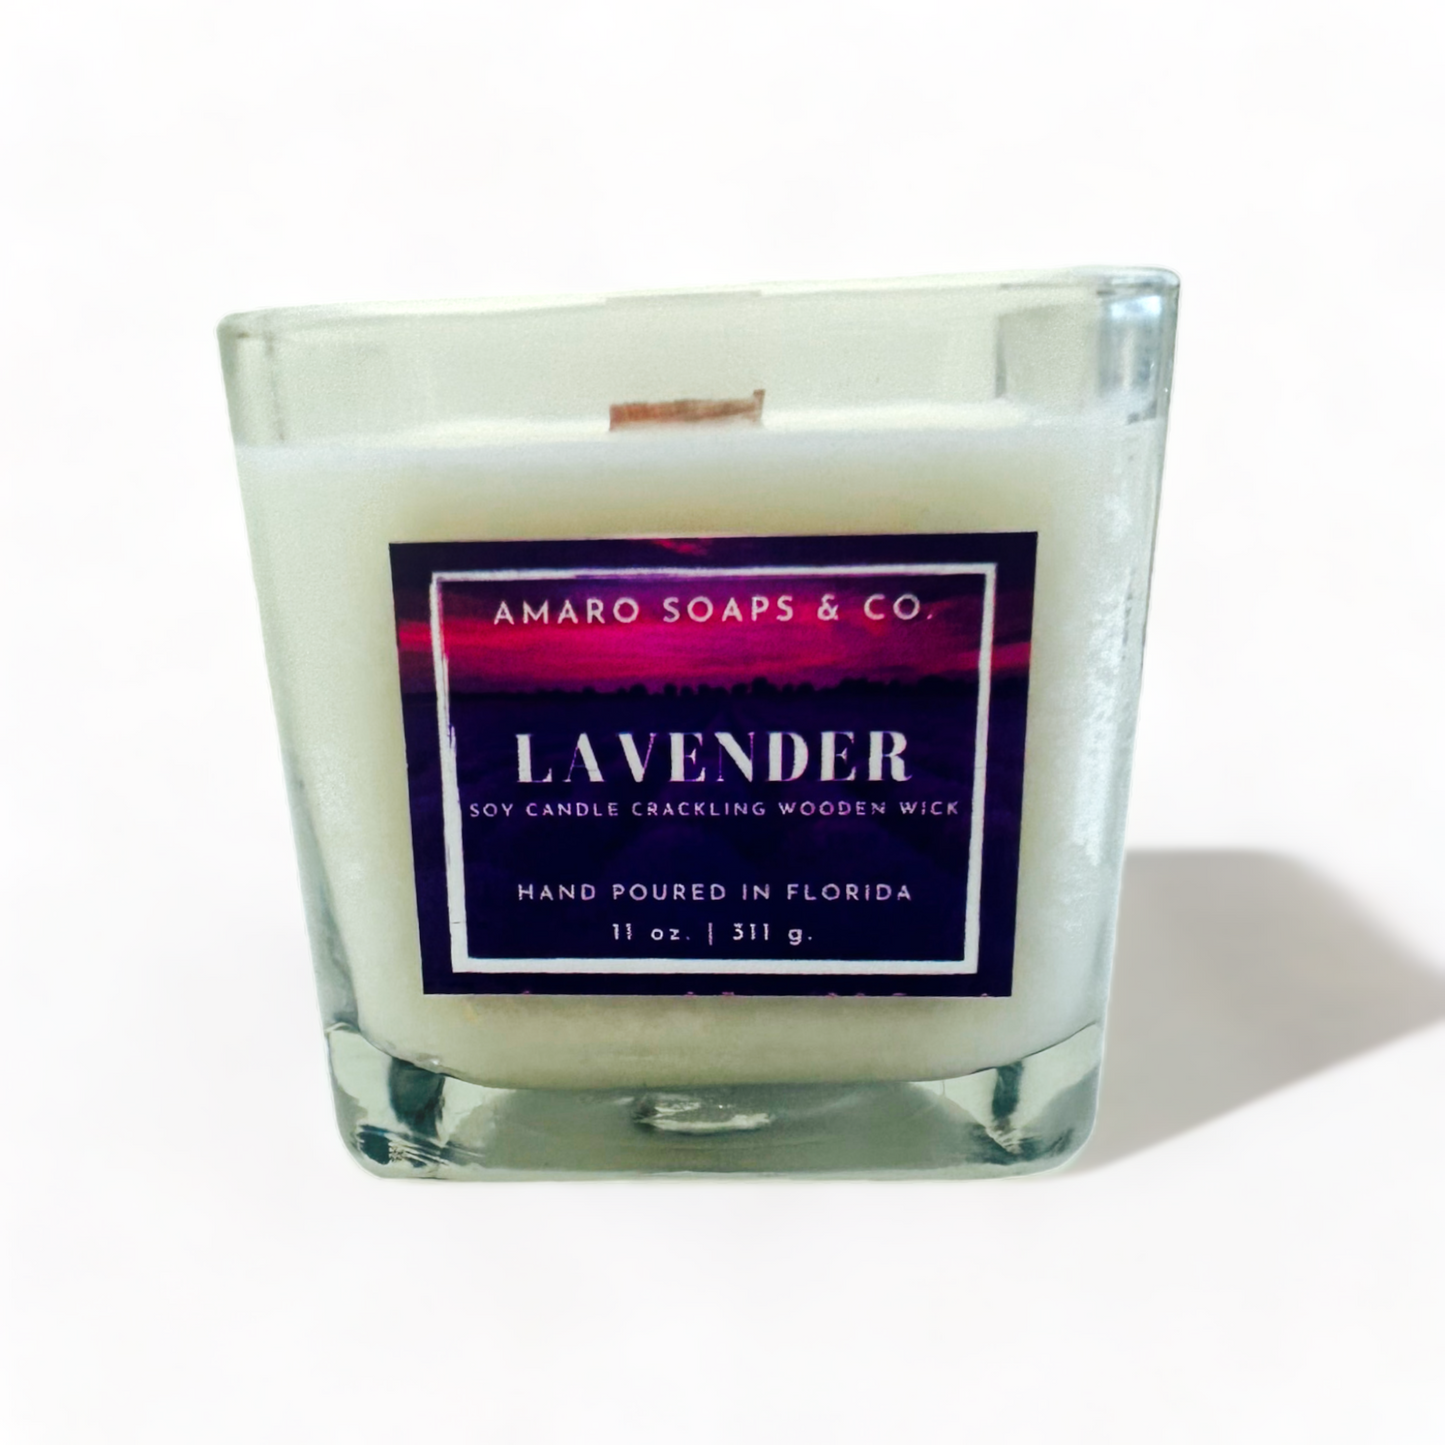 Lavender Wooden Wick Soy Candle